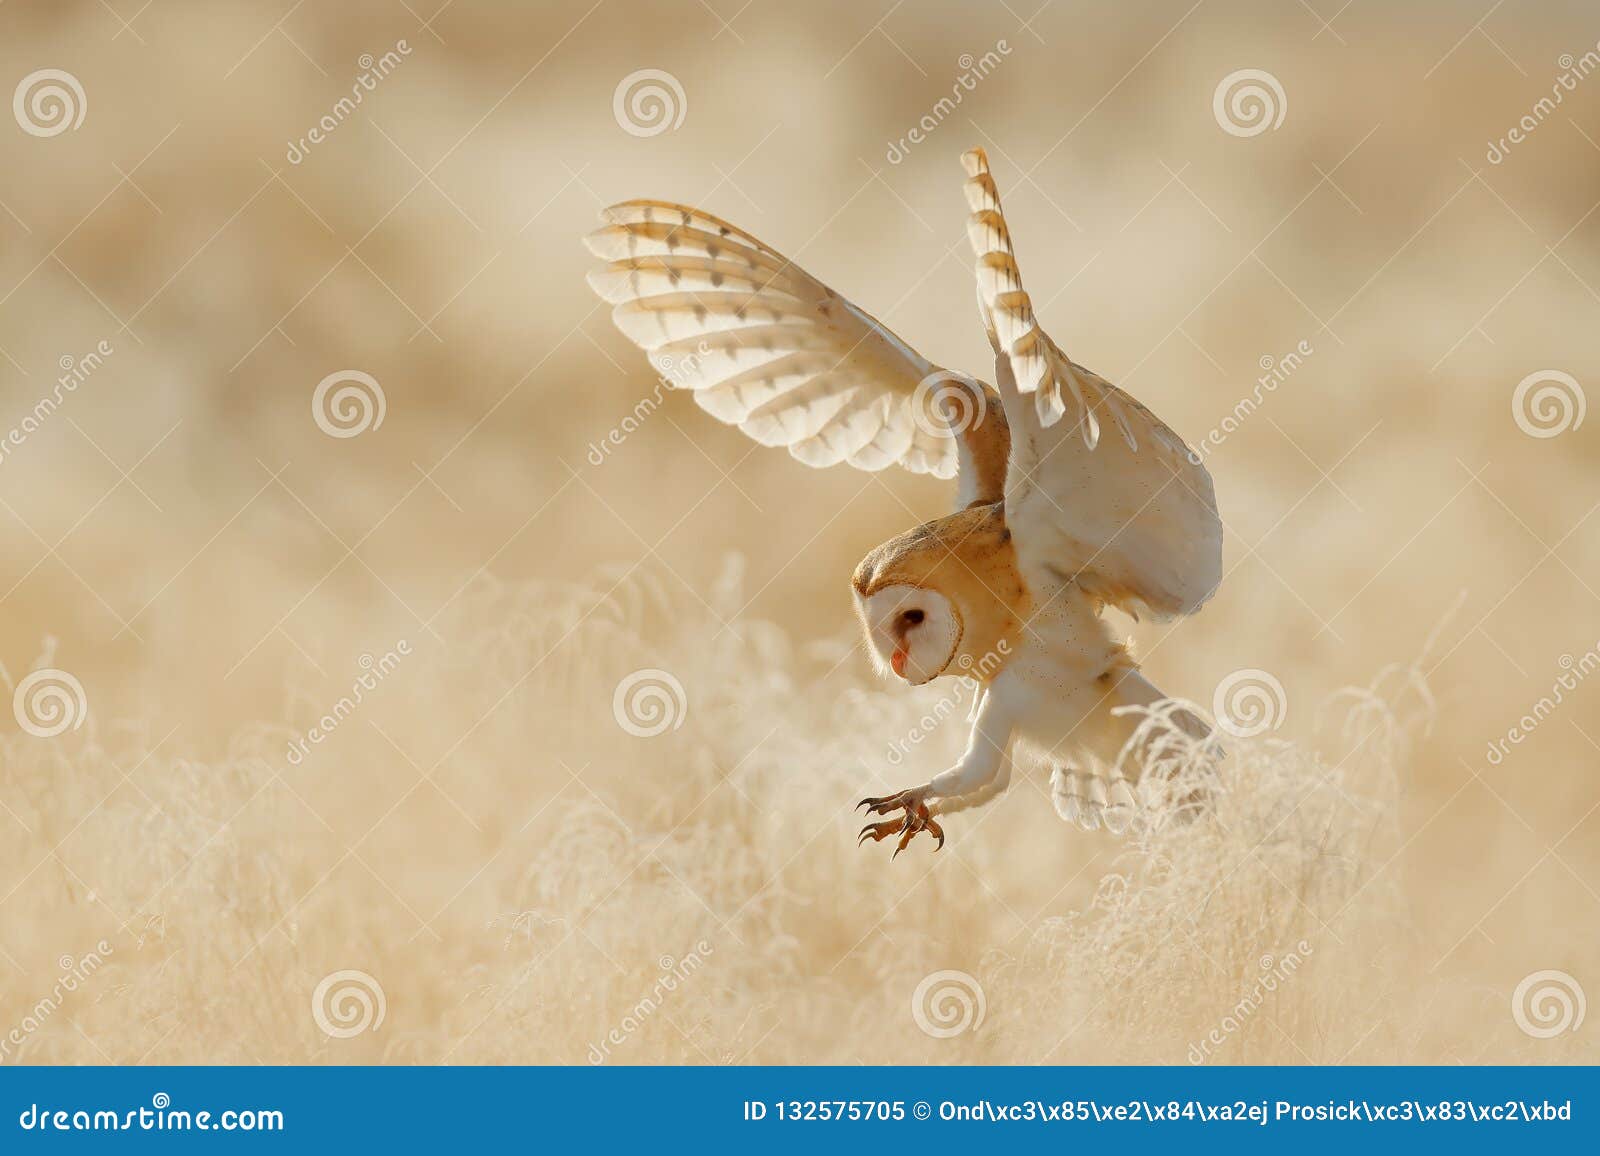 owl fly with open wings. barn owl, tyto alba, sitting on the rime white grass in the morning. wildlife bird scene from nature.